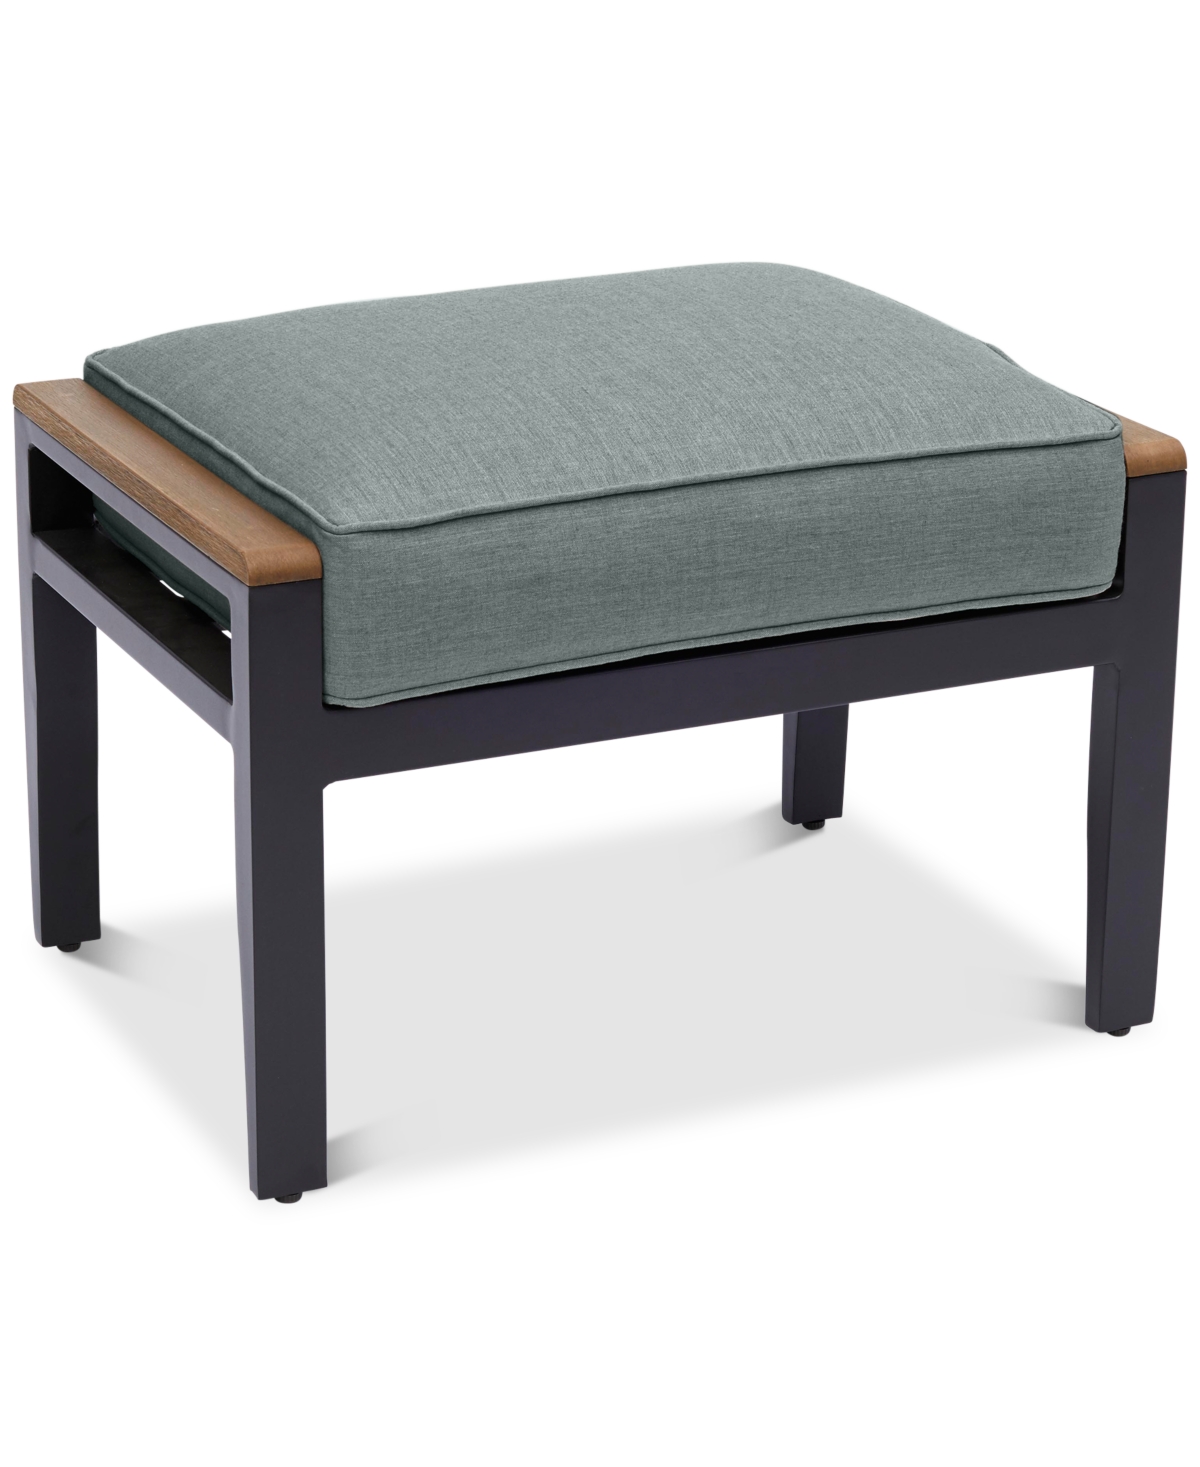 Stockholm Outdoor Ottoman with Outdoor Cushion, Created for Macys